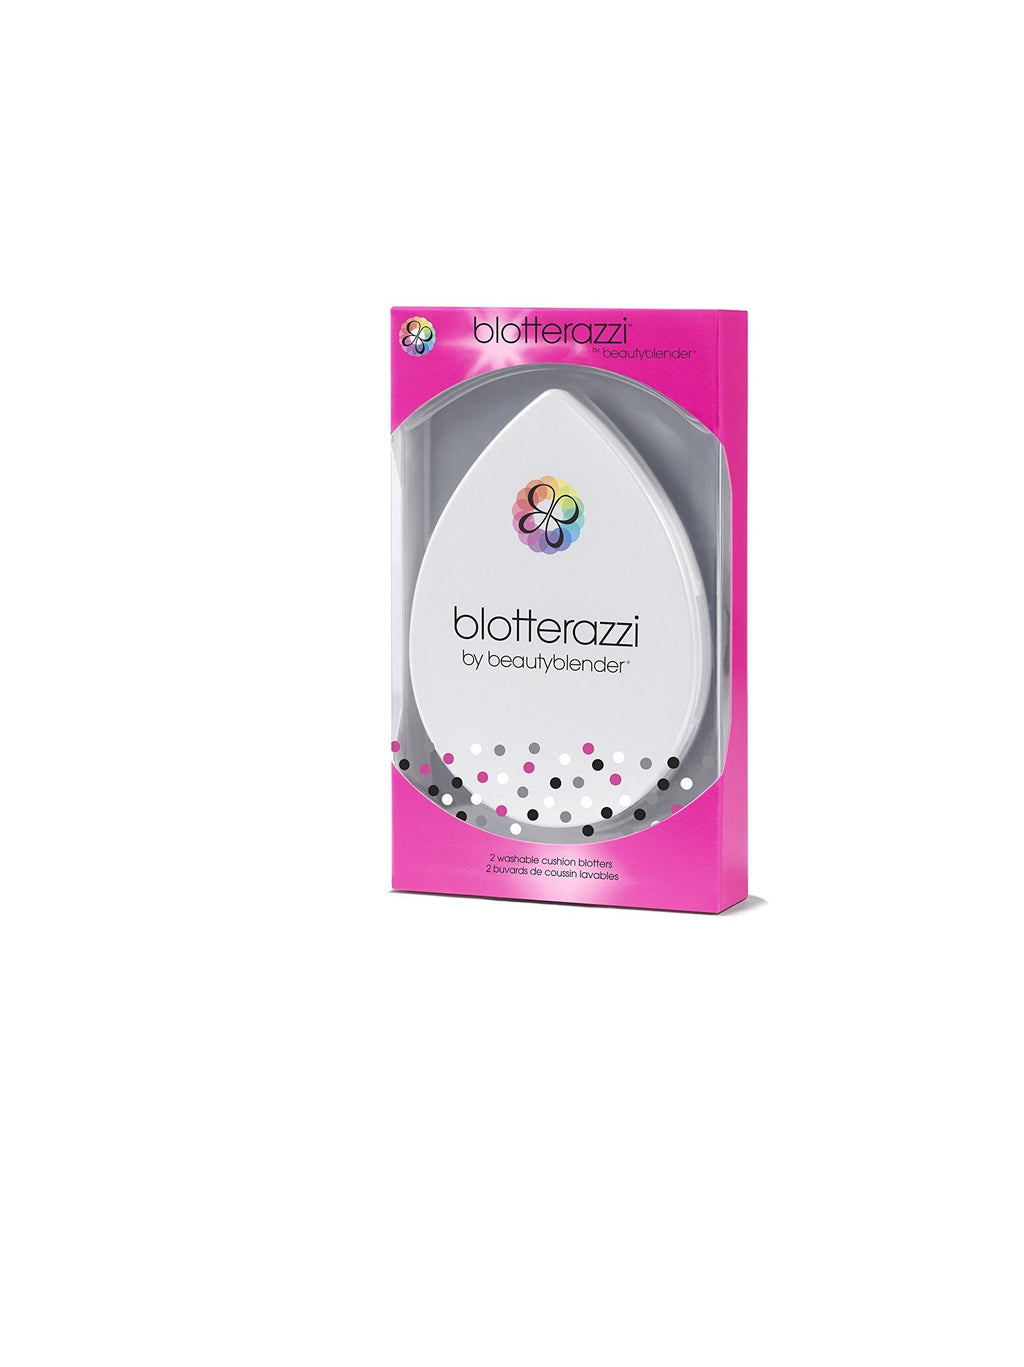 [Australia] - BEAUTYBLENDER Blotterazzi Reusable Makeup Blotting Pad with Mirrored Compact. Vegan, Cruelty Free and Made in the USA 